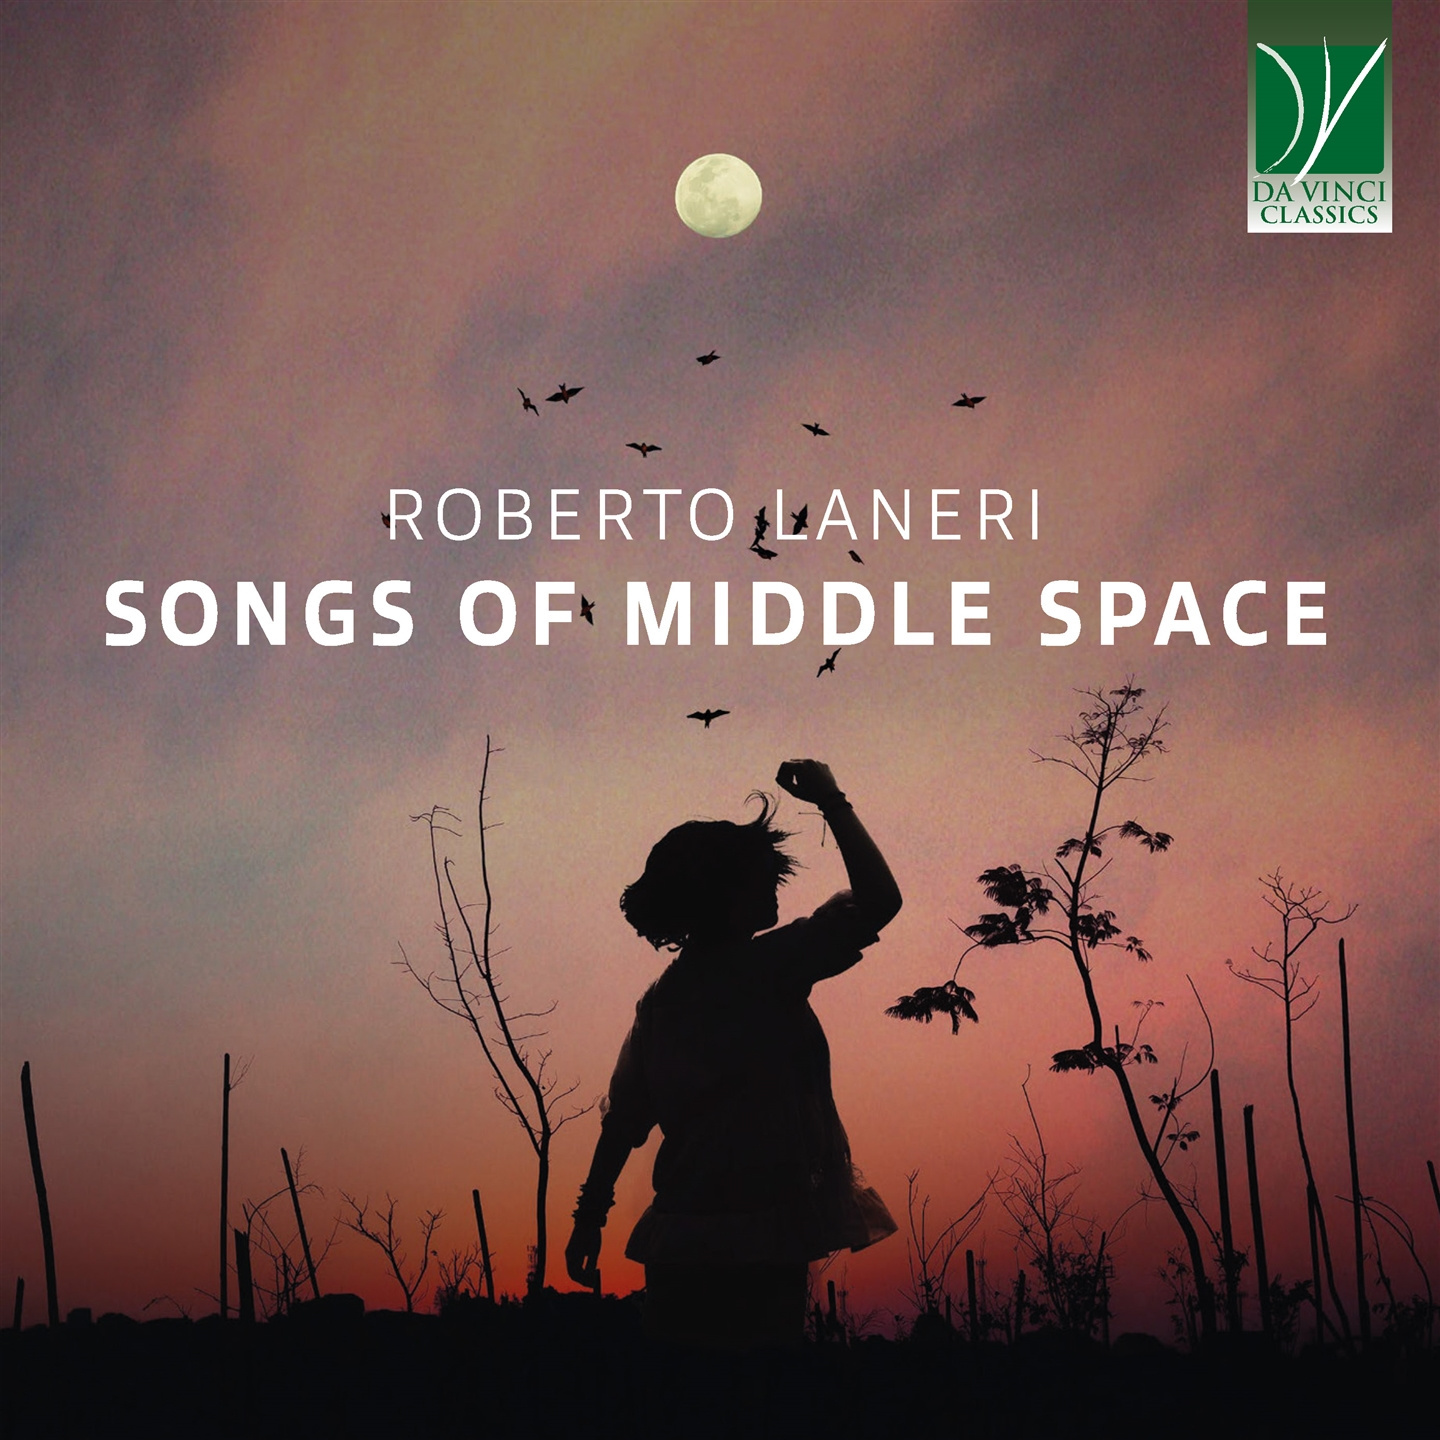 ROBERTO LANERI: SONGS OF THE MIDDLE SPACE